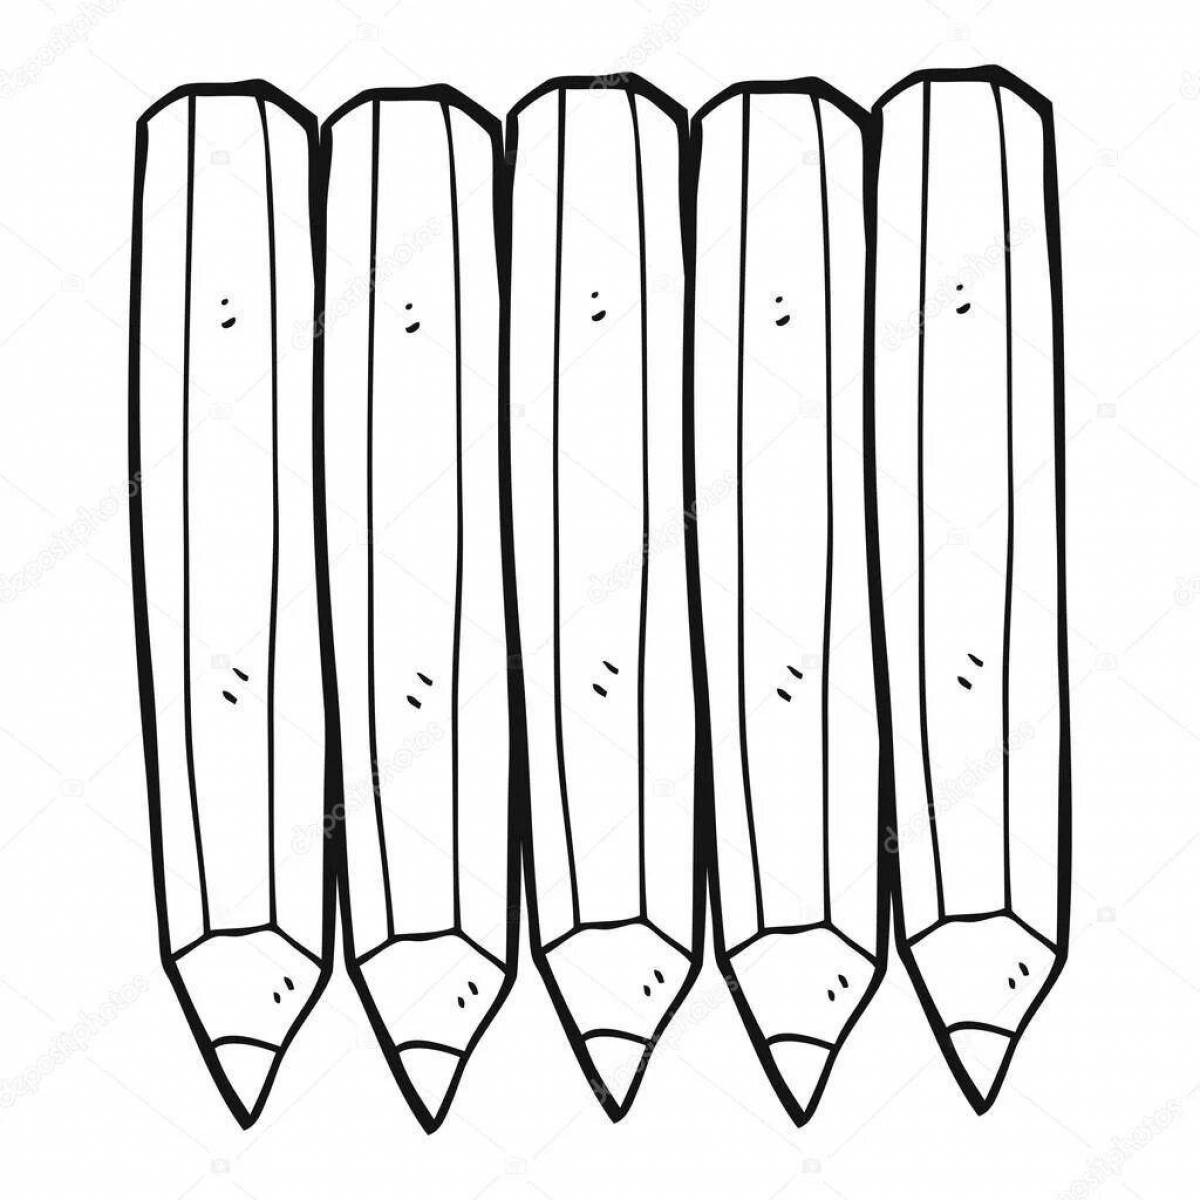 Charming pencils roux coloring page